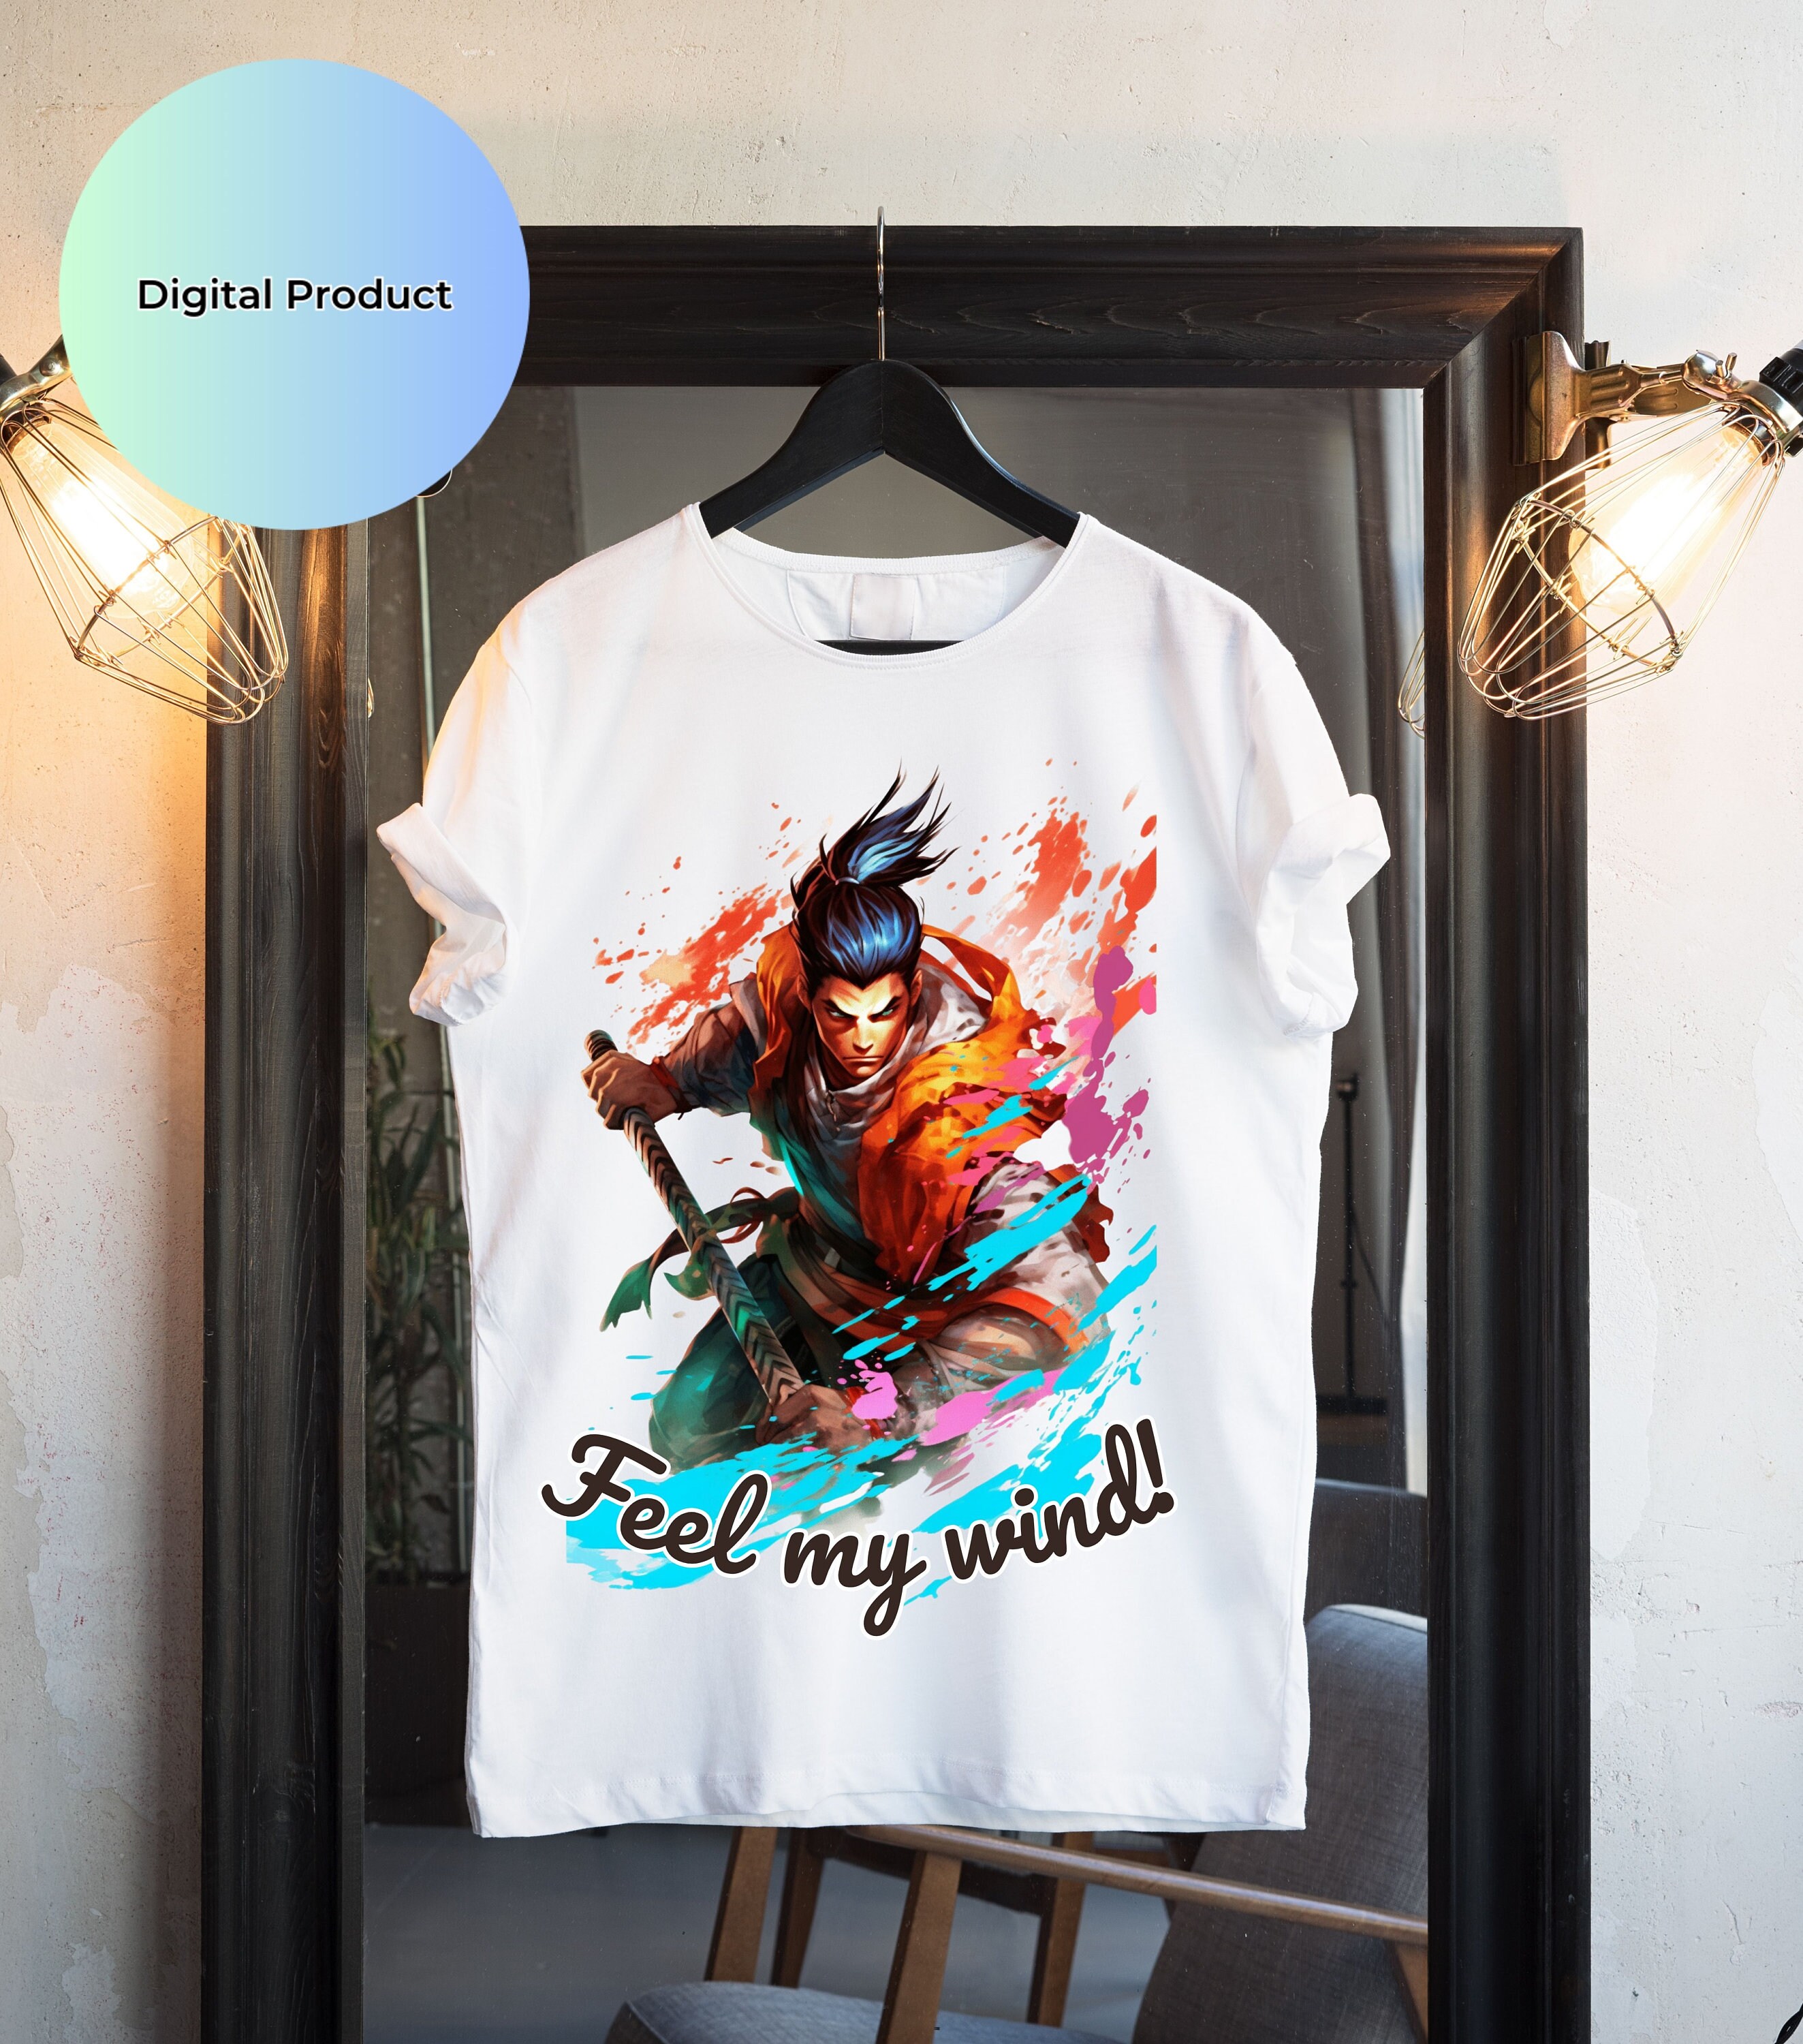 League of Legends - Yasuo  Clothes and accessories for merchandise fans